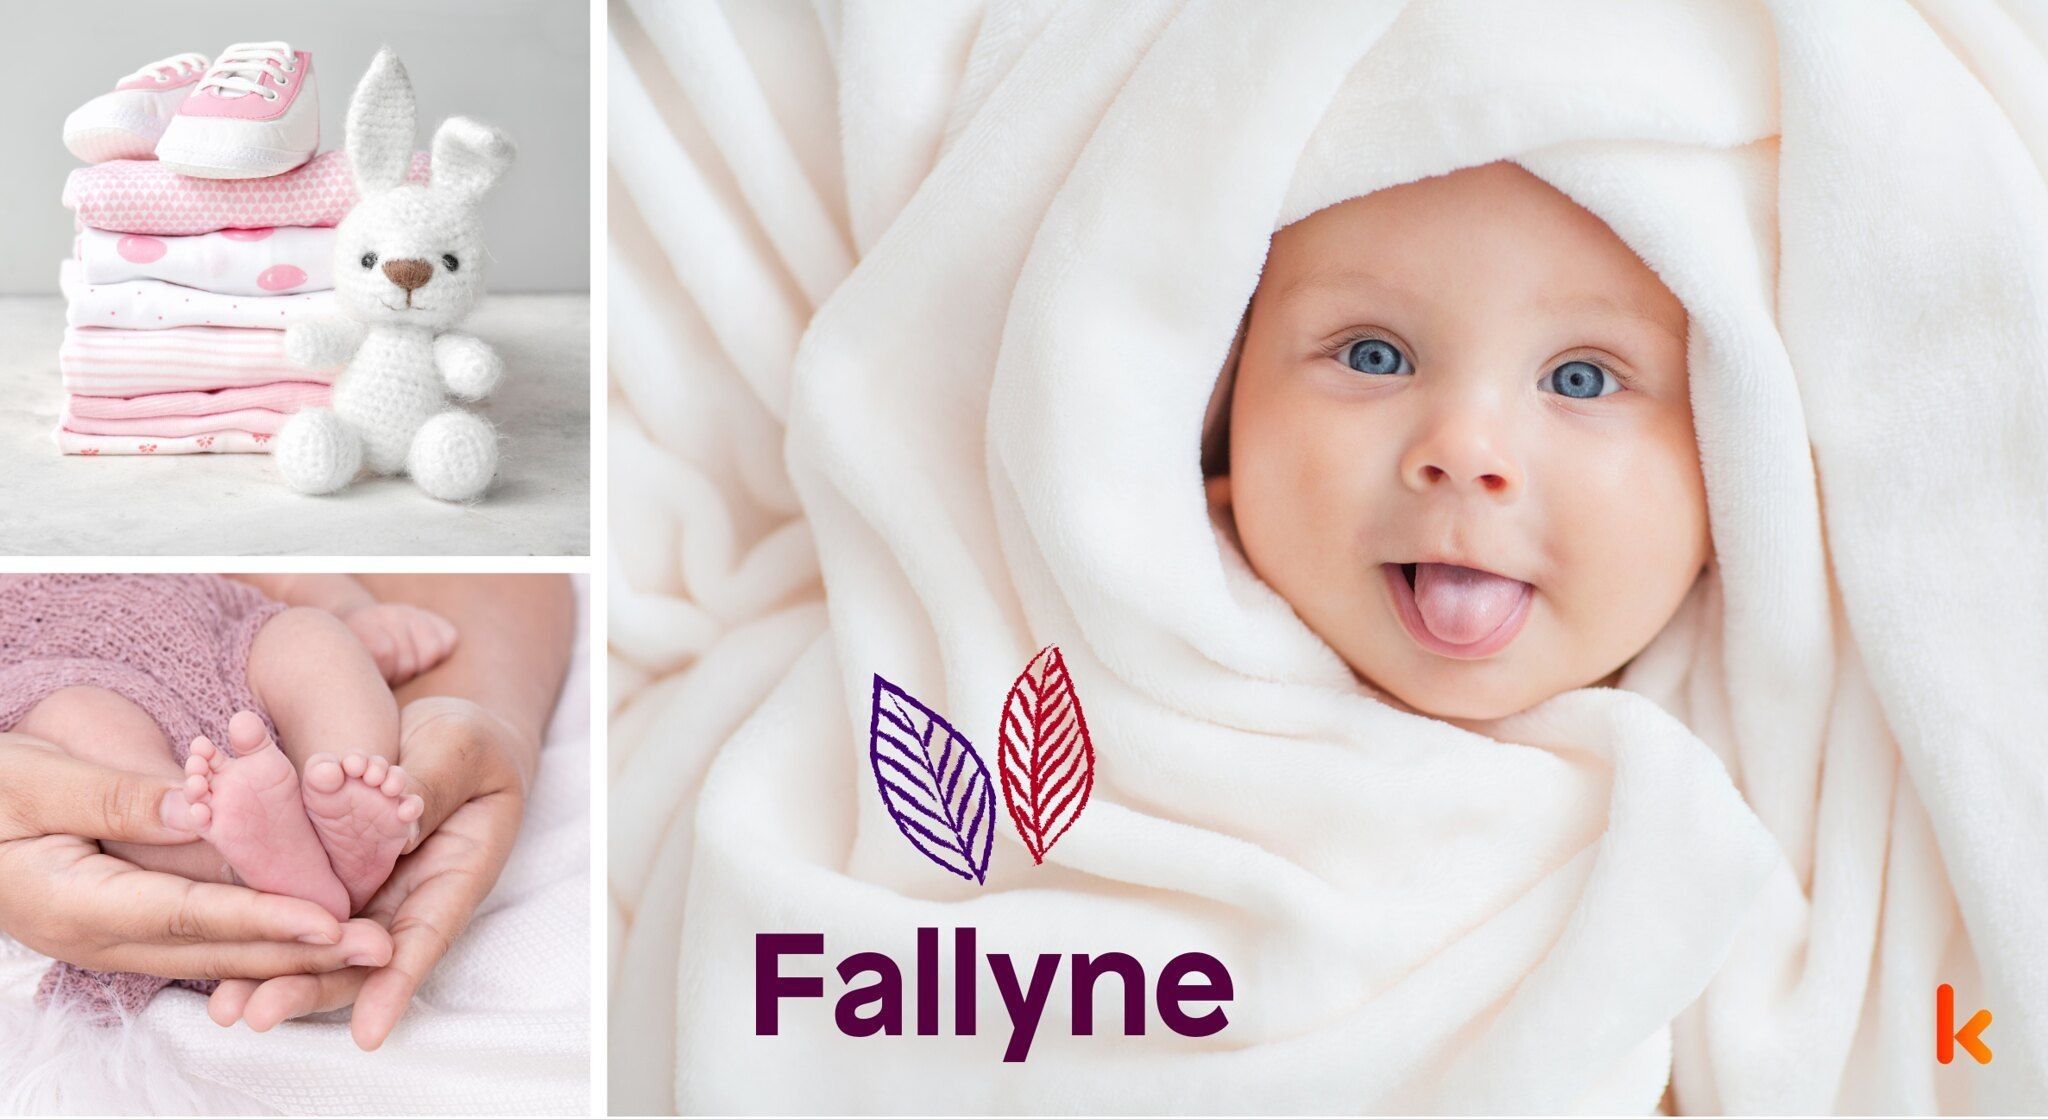 Meaning of the name Fallyne